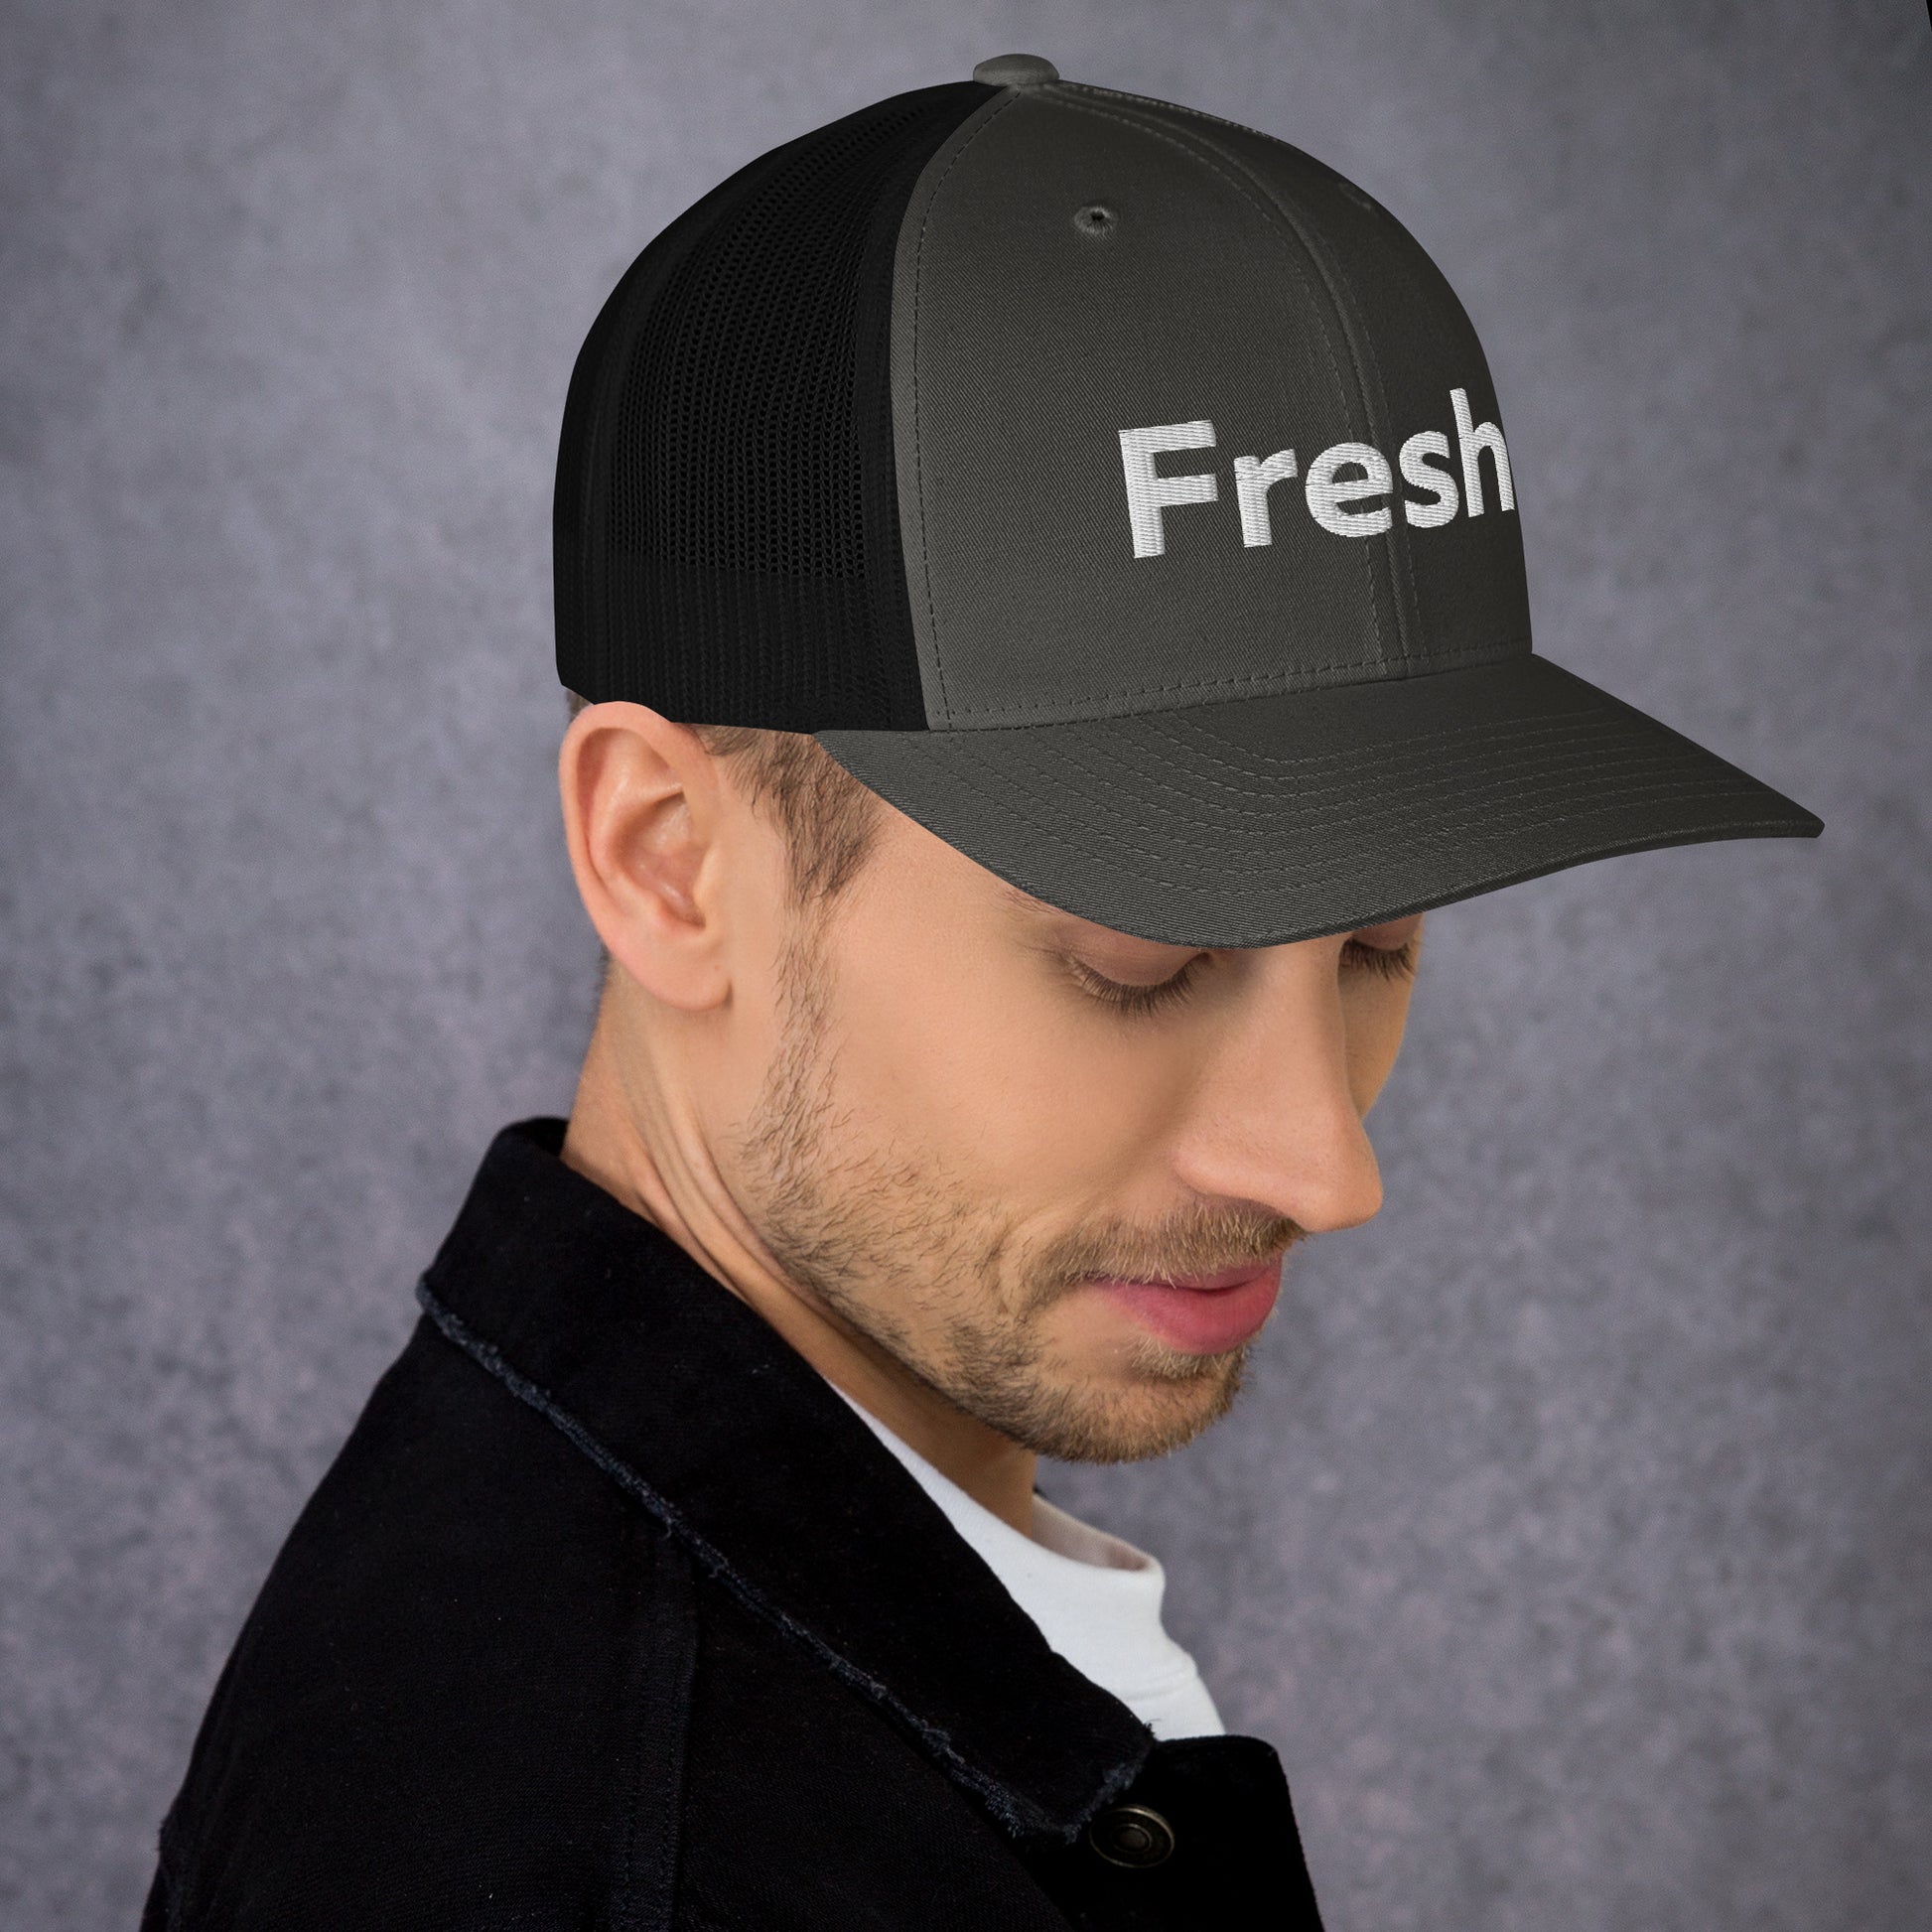 Looking for a hat that combines style and comfort? Look no further than the Fresh Hat! Color: Charcoal and Black 